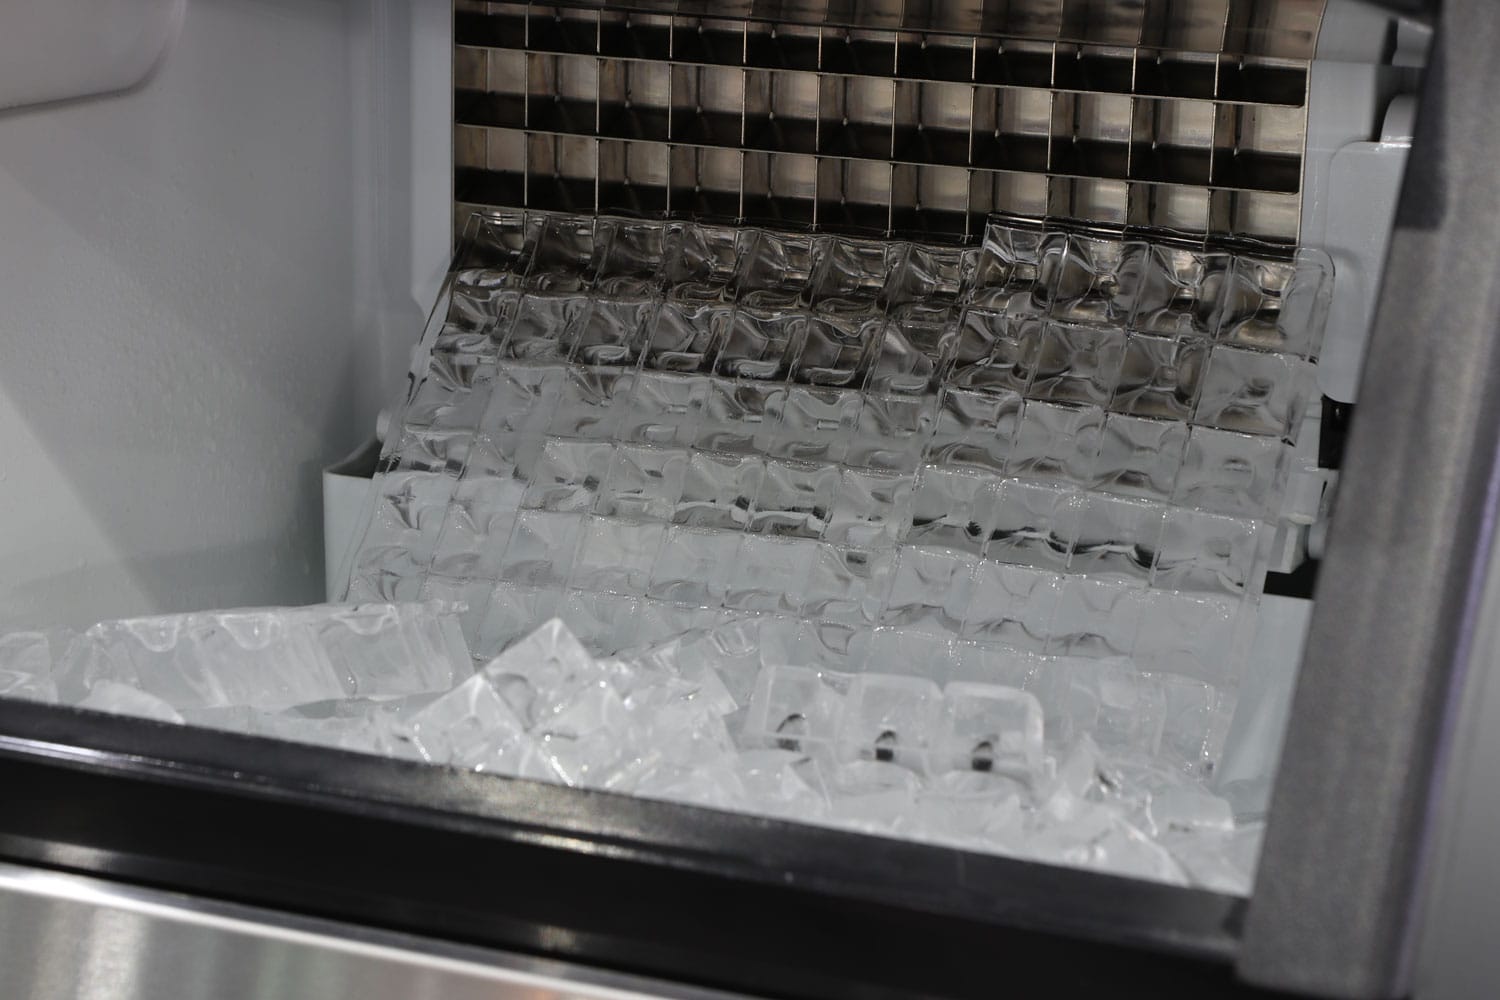 Interior of an automatic ice maker machine